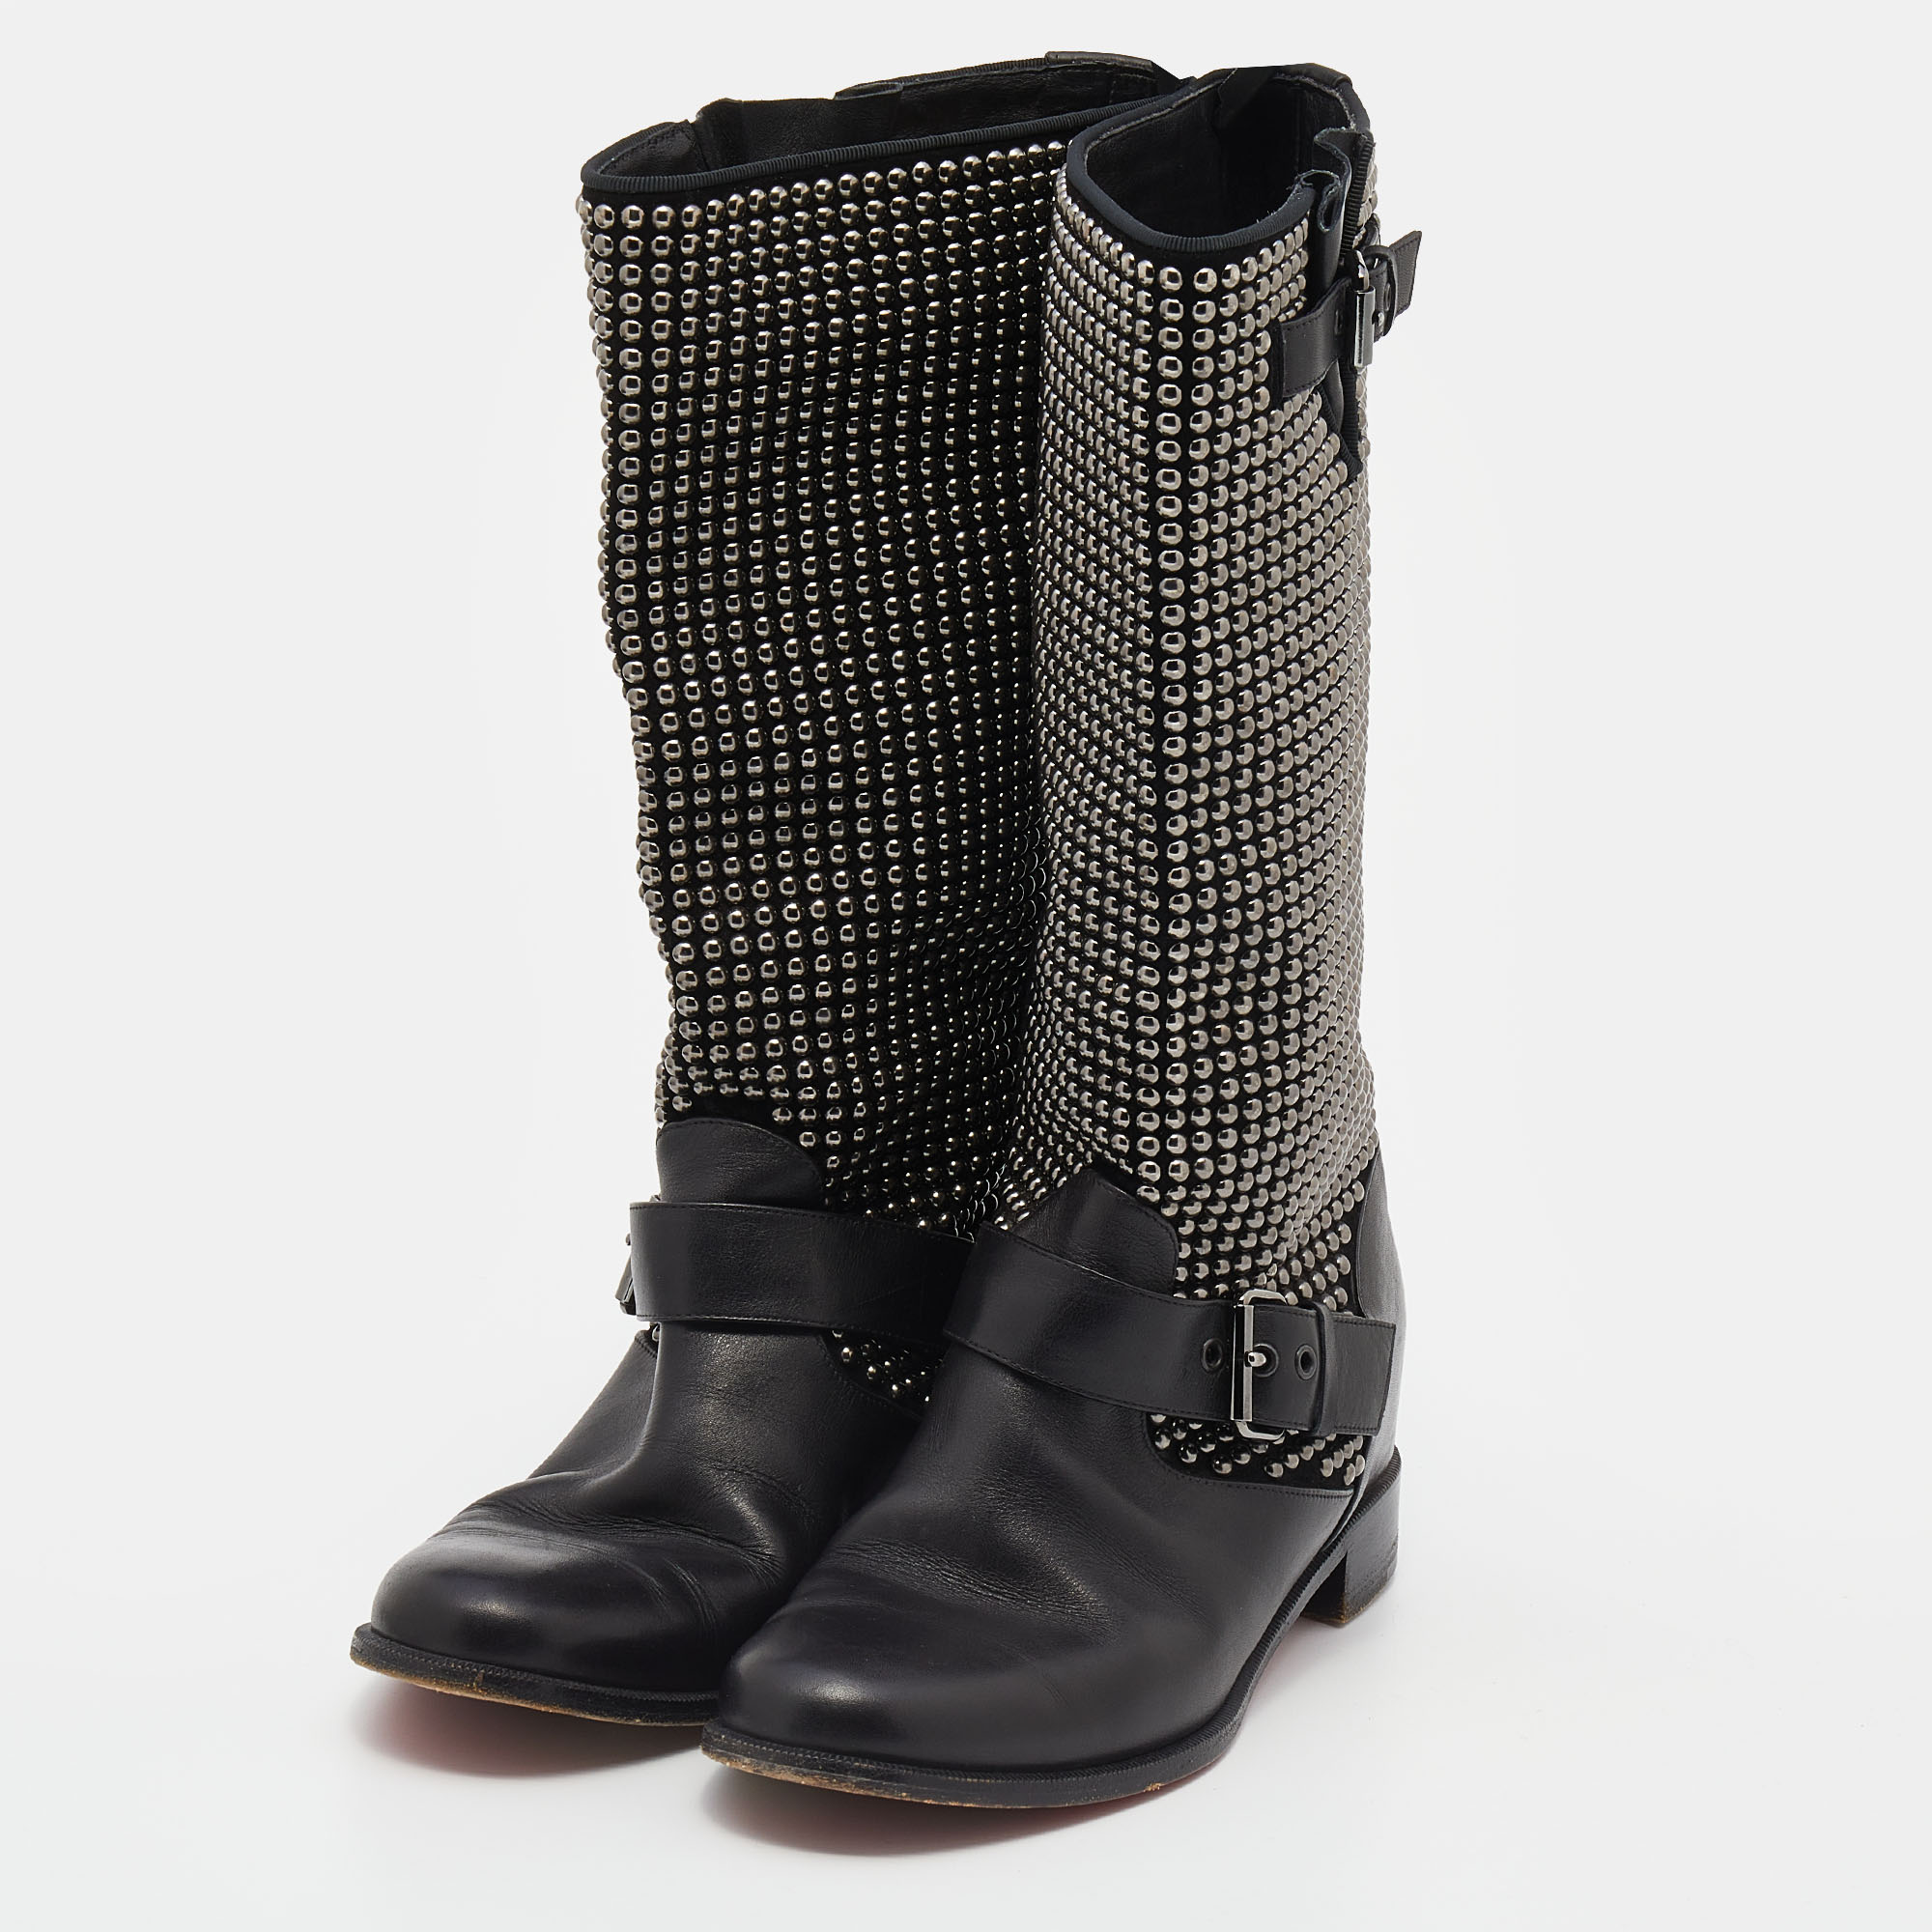 

Christian Louboutin Black Leather Studded Buckle Detail Mid Calf Boots Size